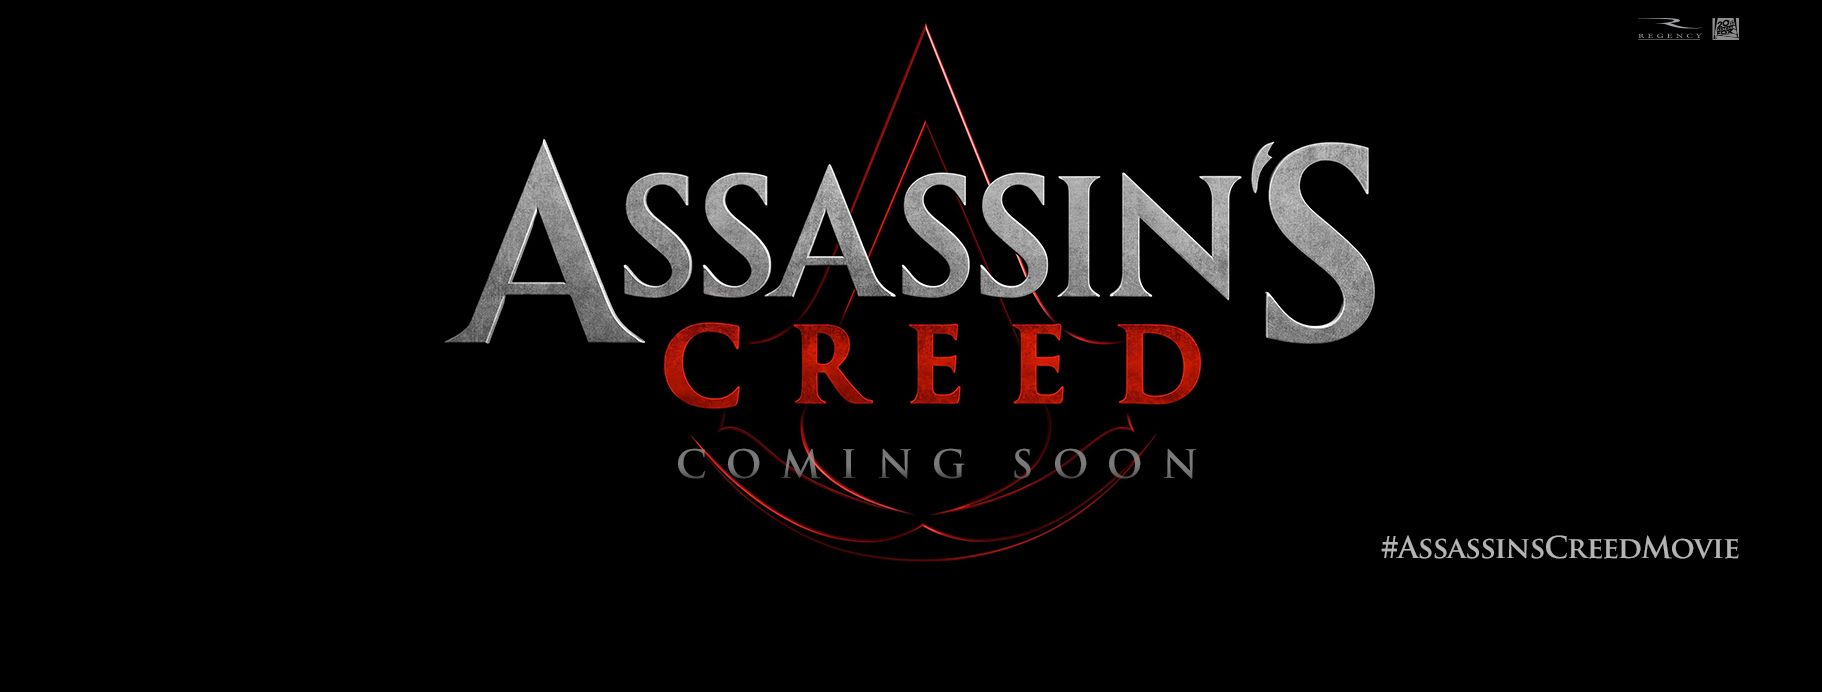 Assassin's Creed movie banner